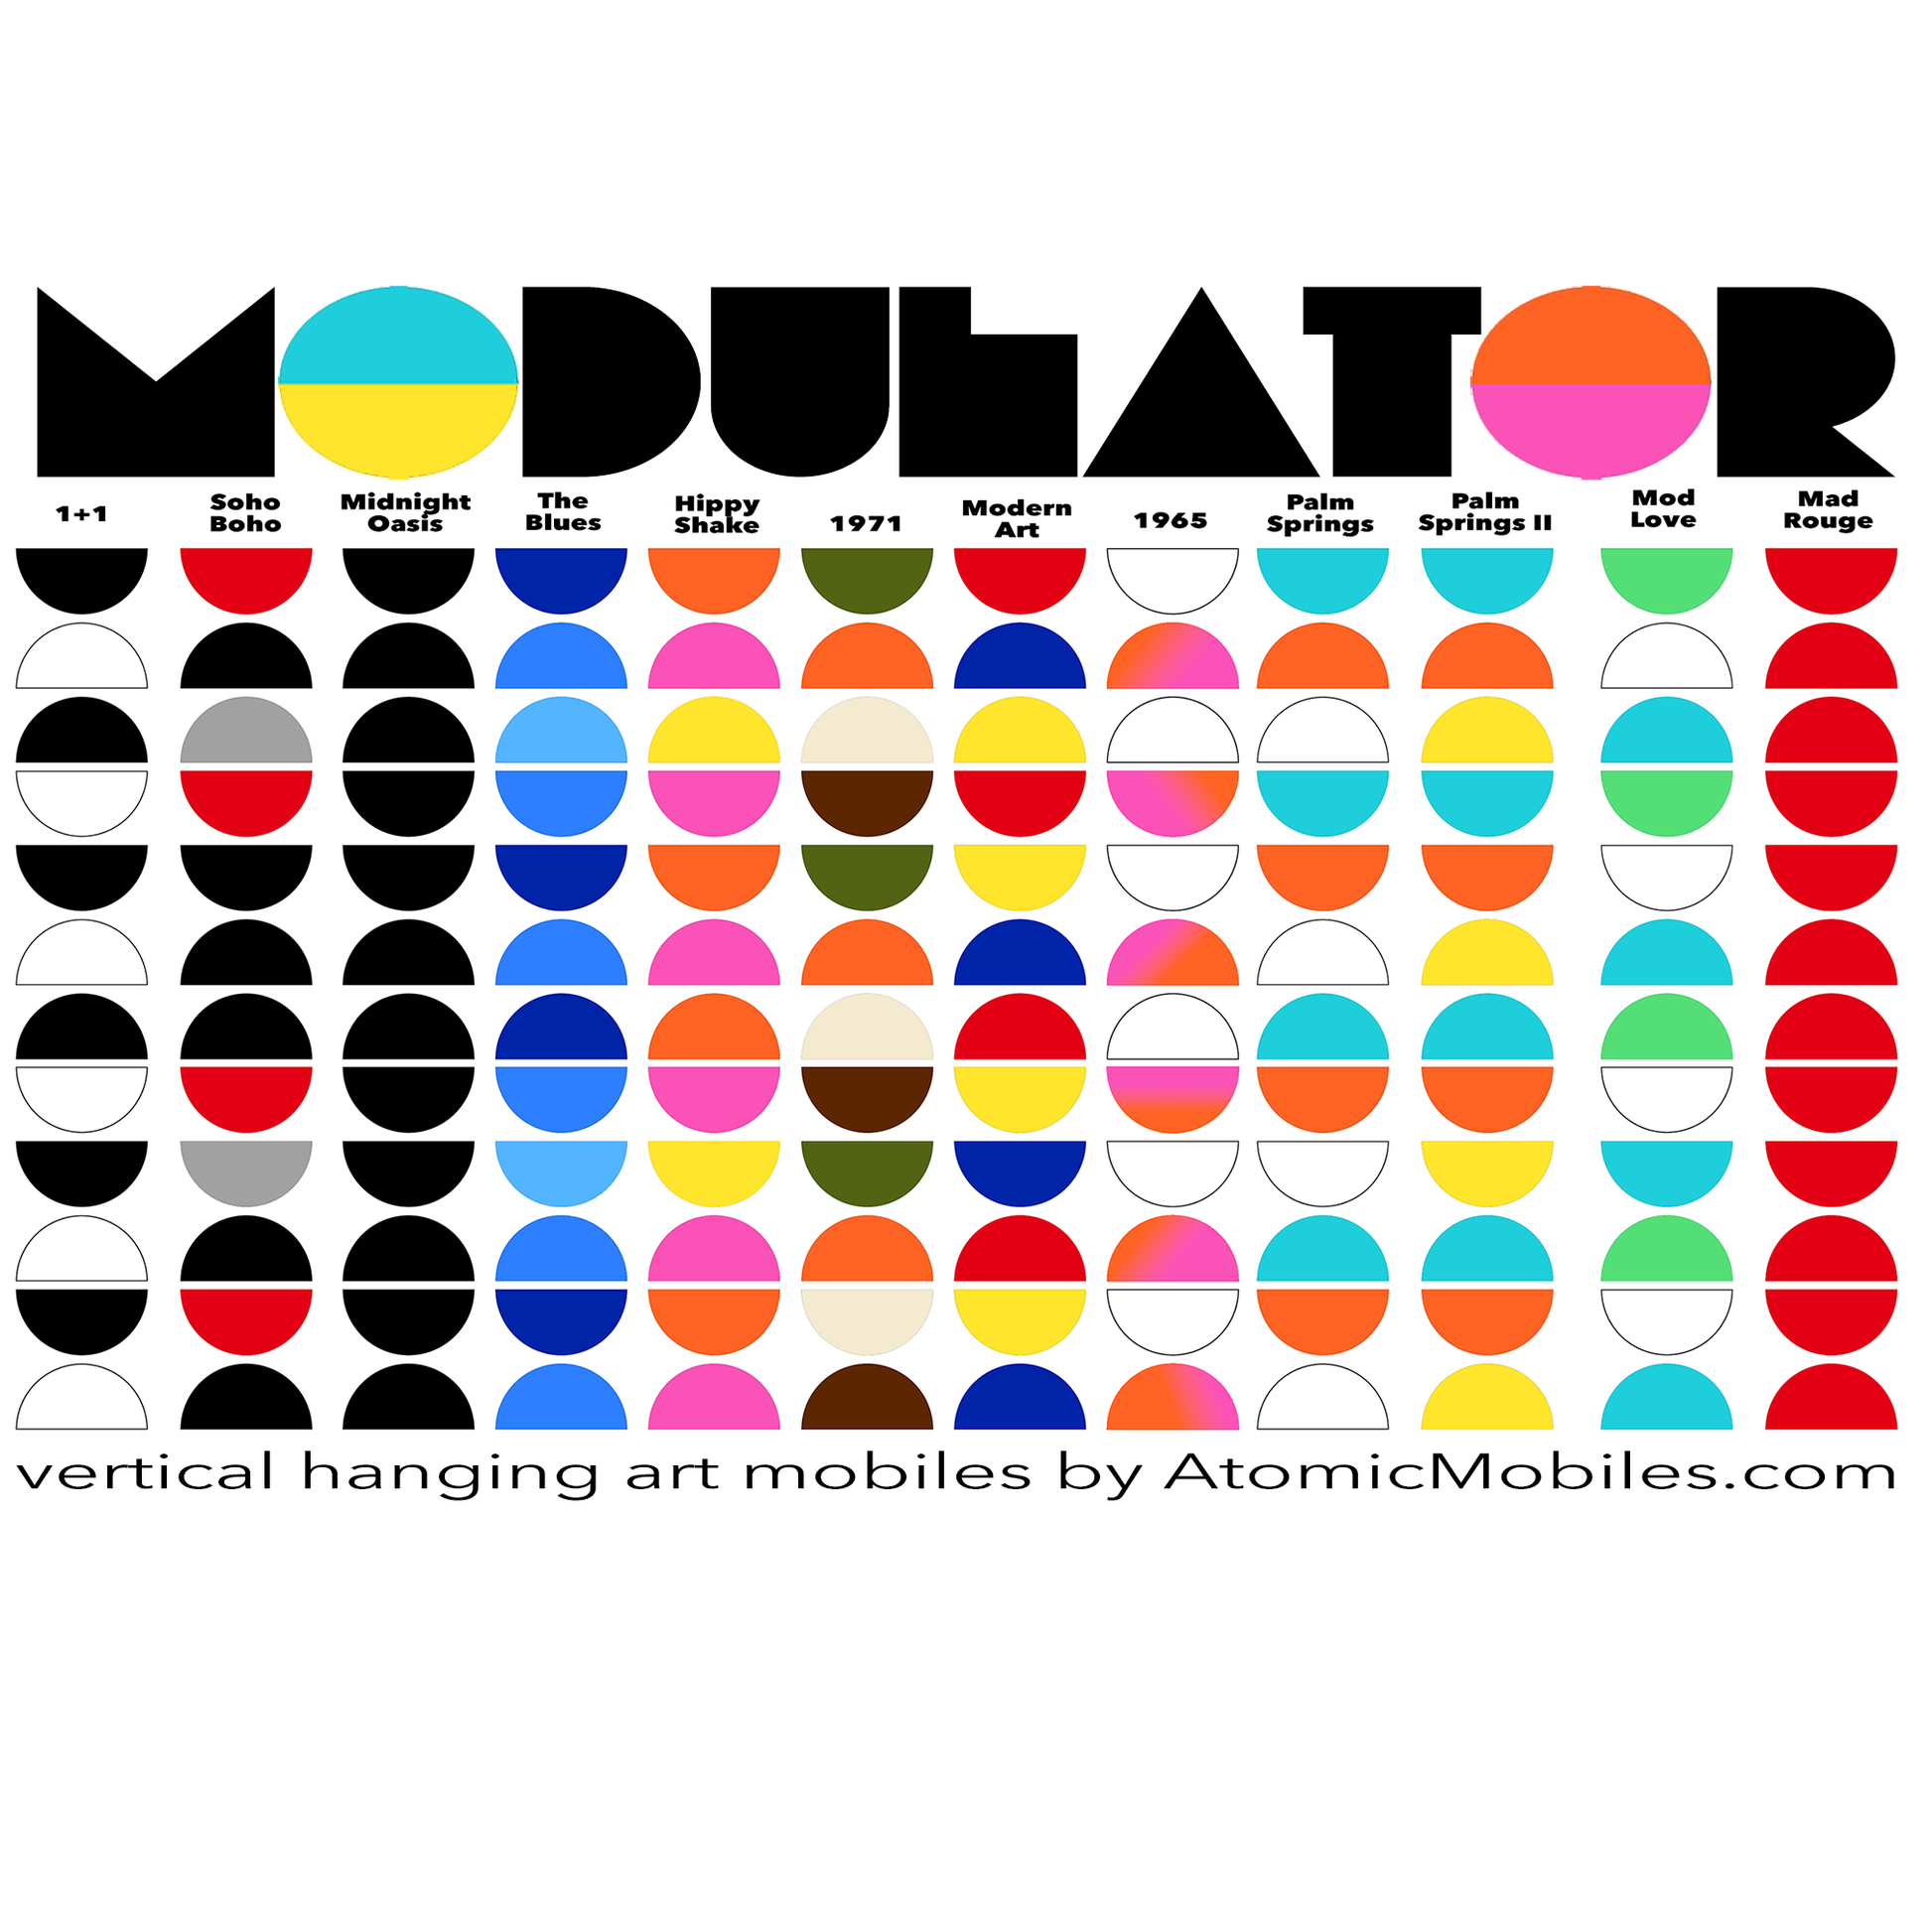 MODulator Color Chart - mid century modern retro style hanging kinetic art mobiles by AtomicMobiles.com in 12 Color Sets